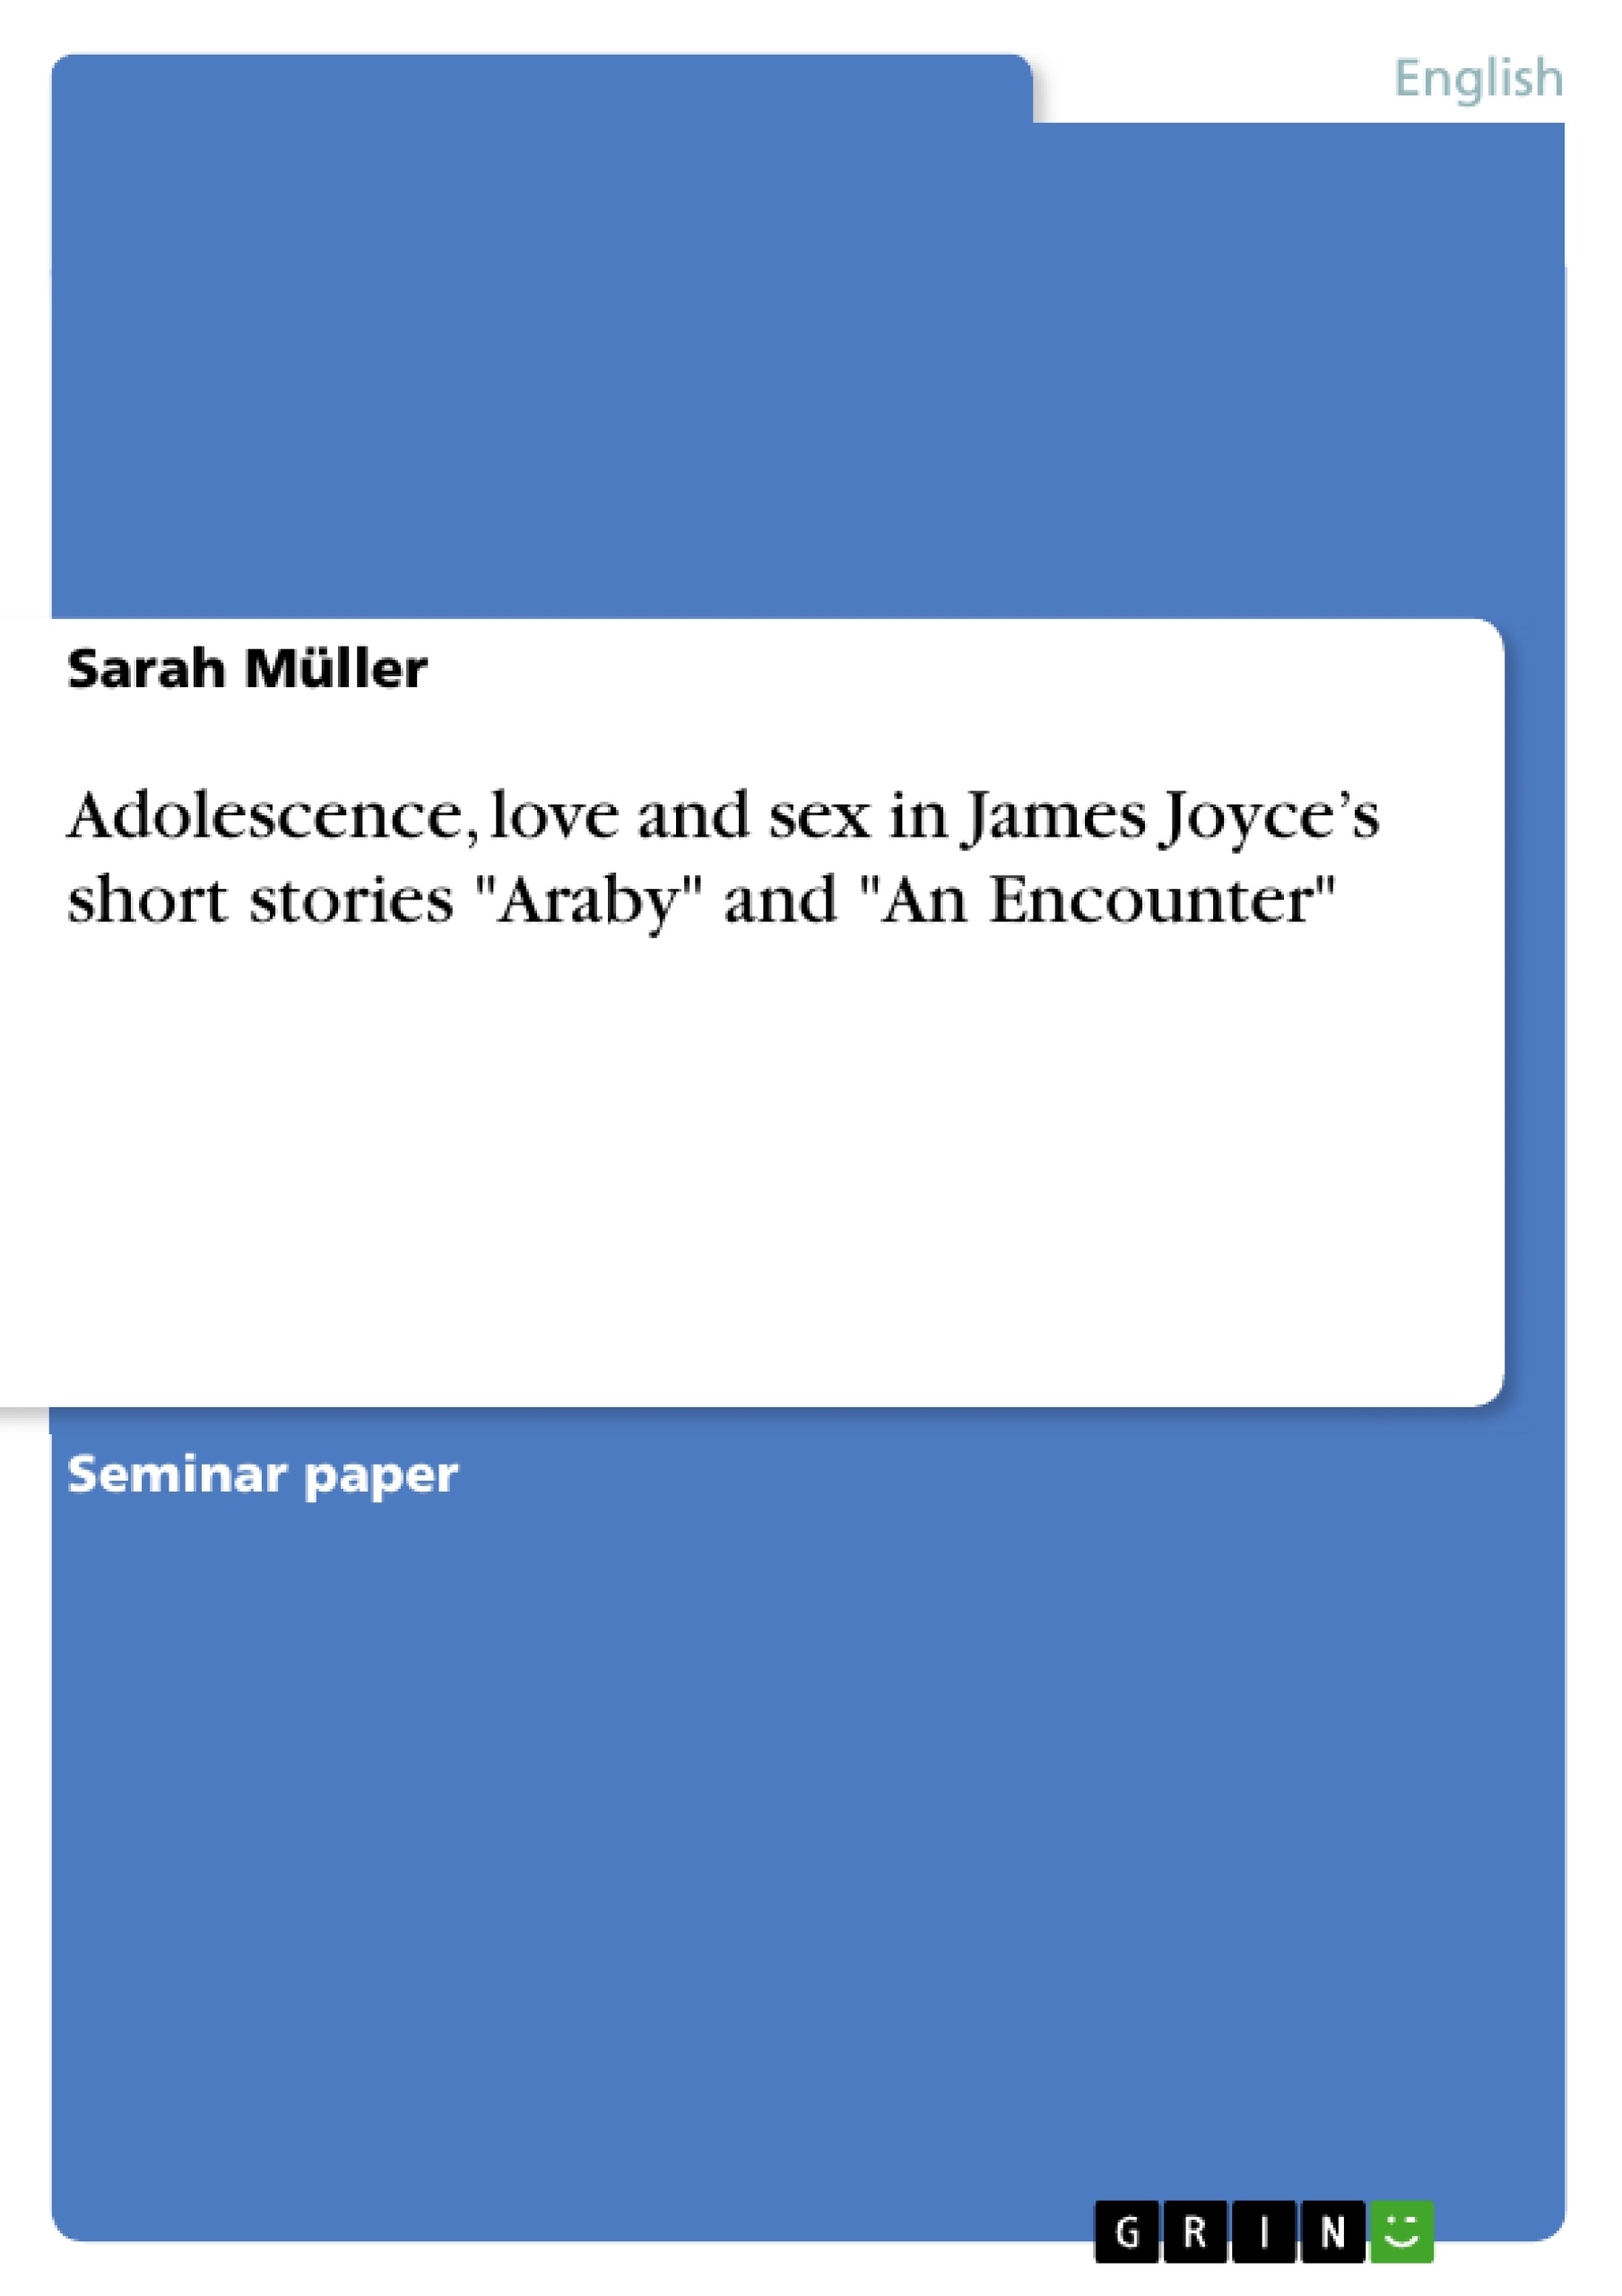 Titre: Adolescence, love and sex in James Joyce’s short stories "Araby" and "An Encounter"